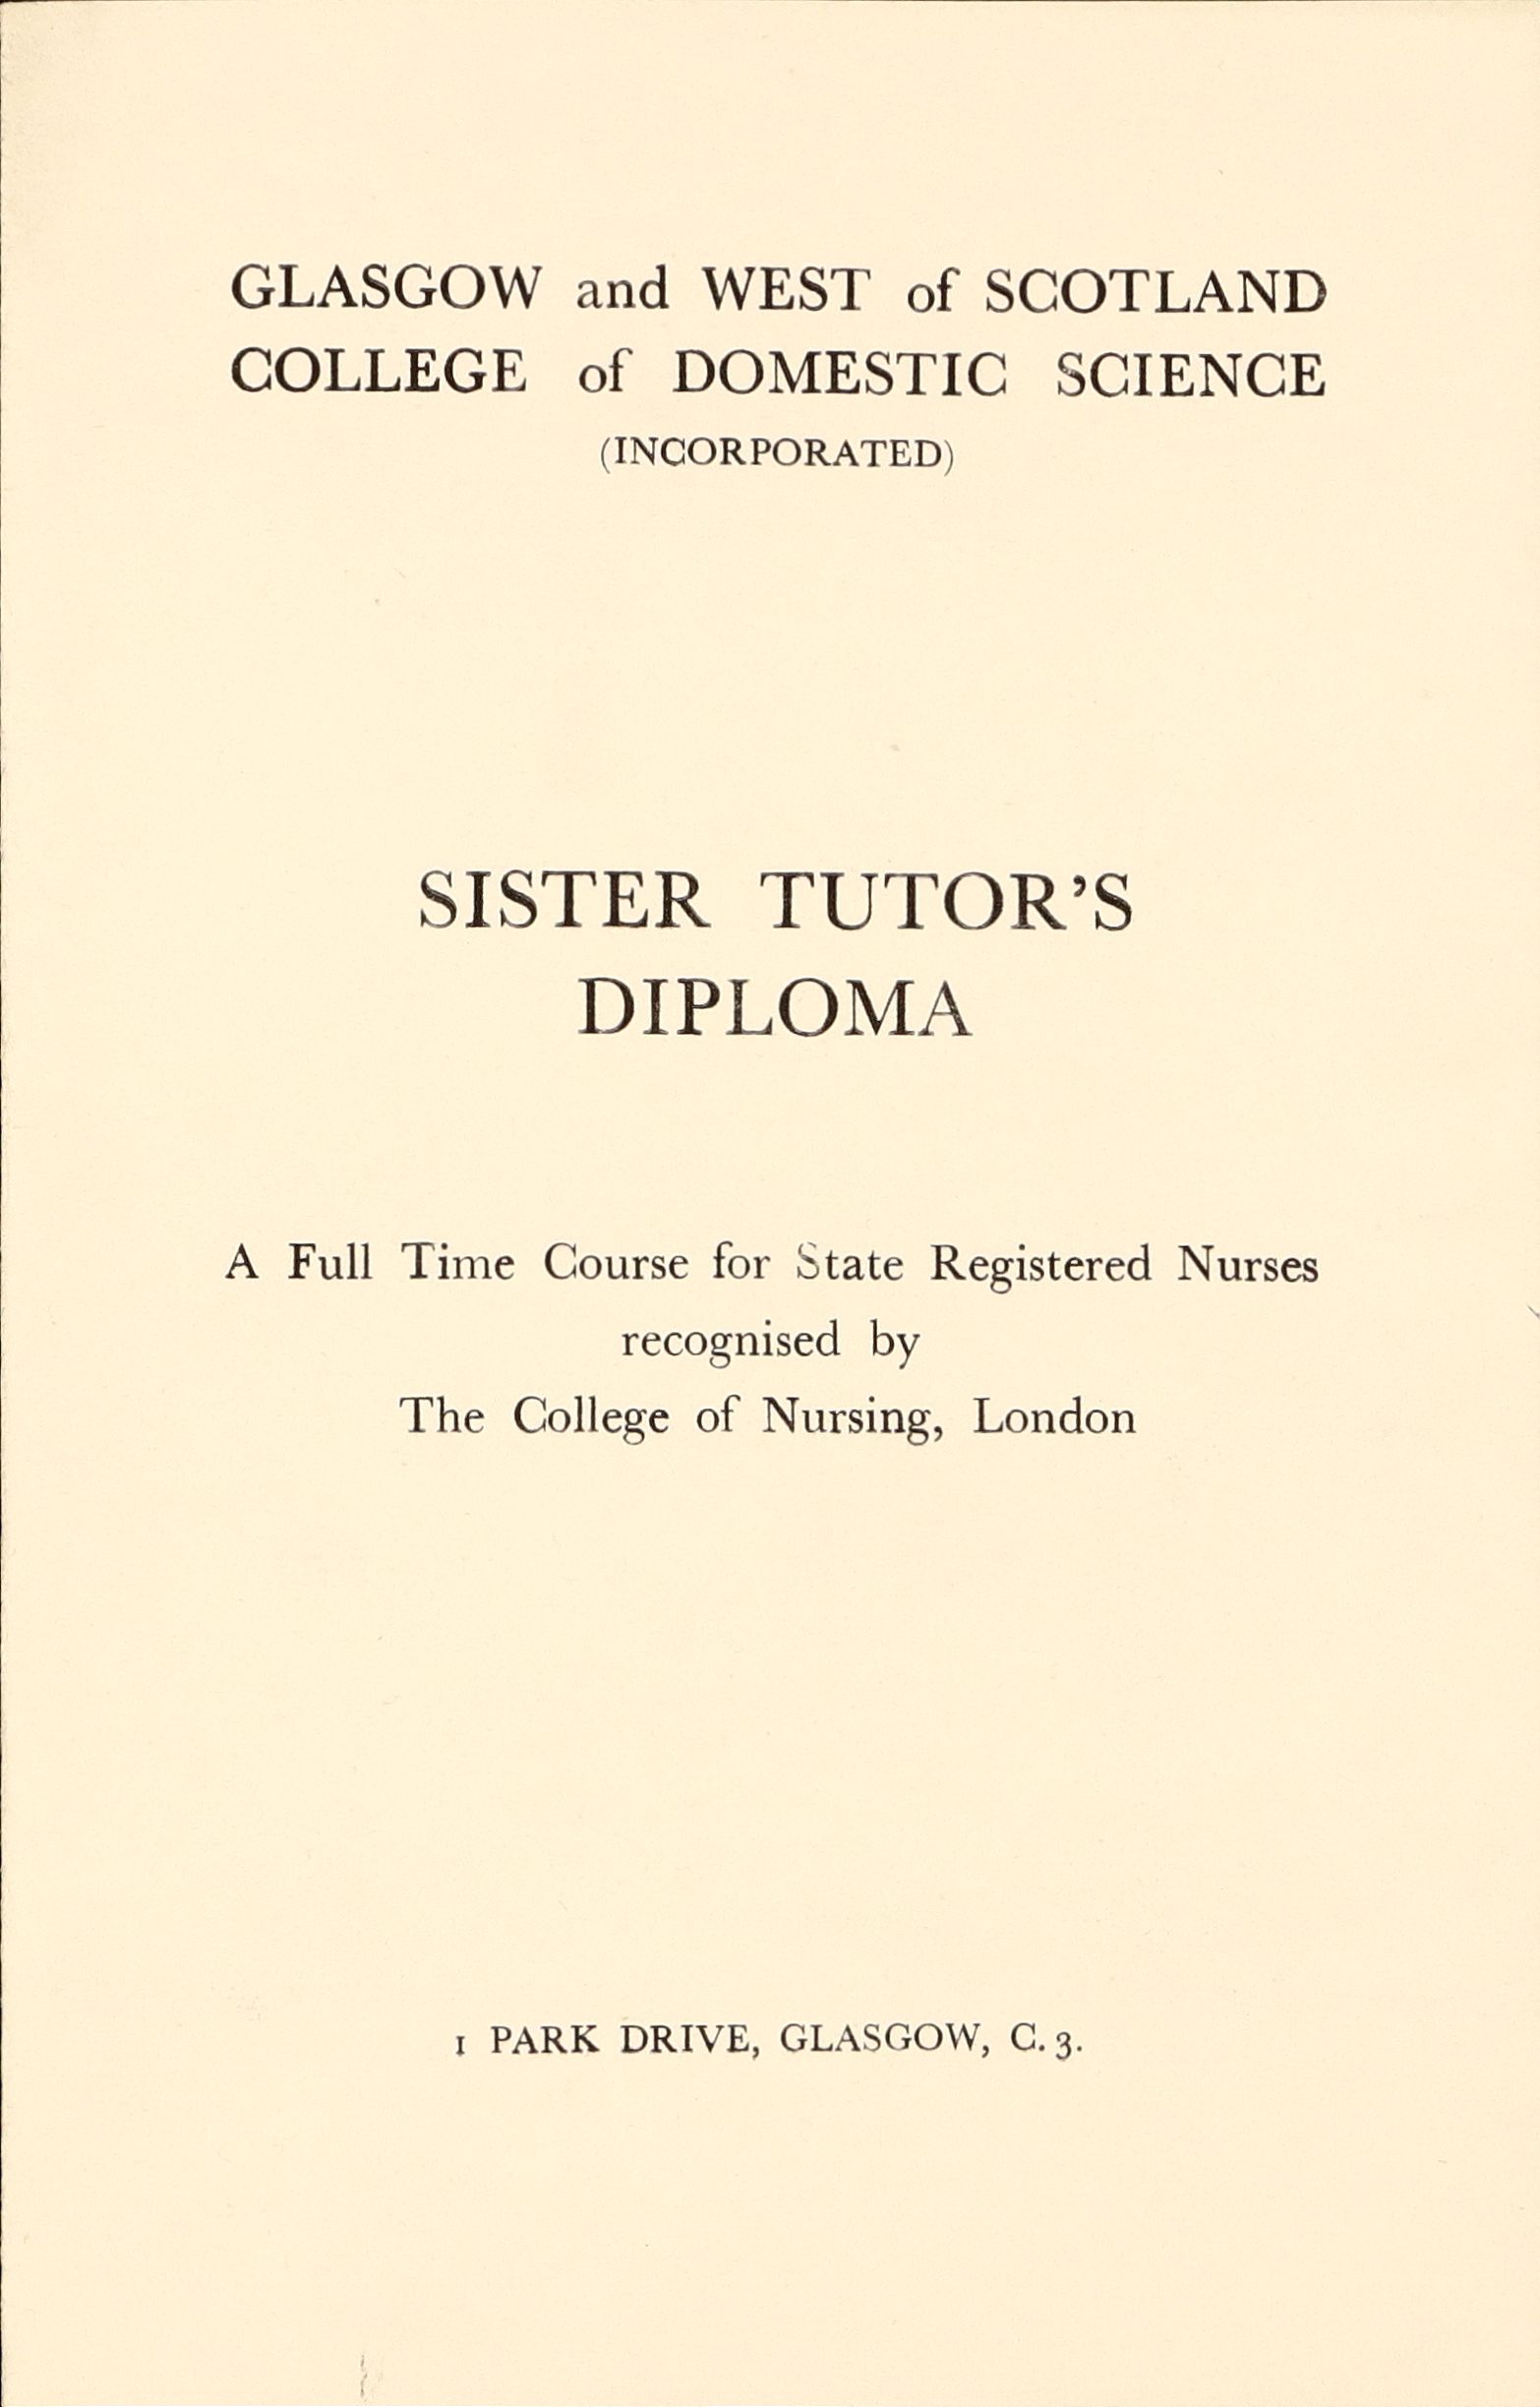 image of the front cover of the syllabus stating "recognised by the College of Nursing, London"